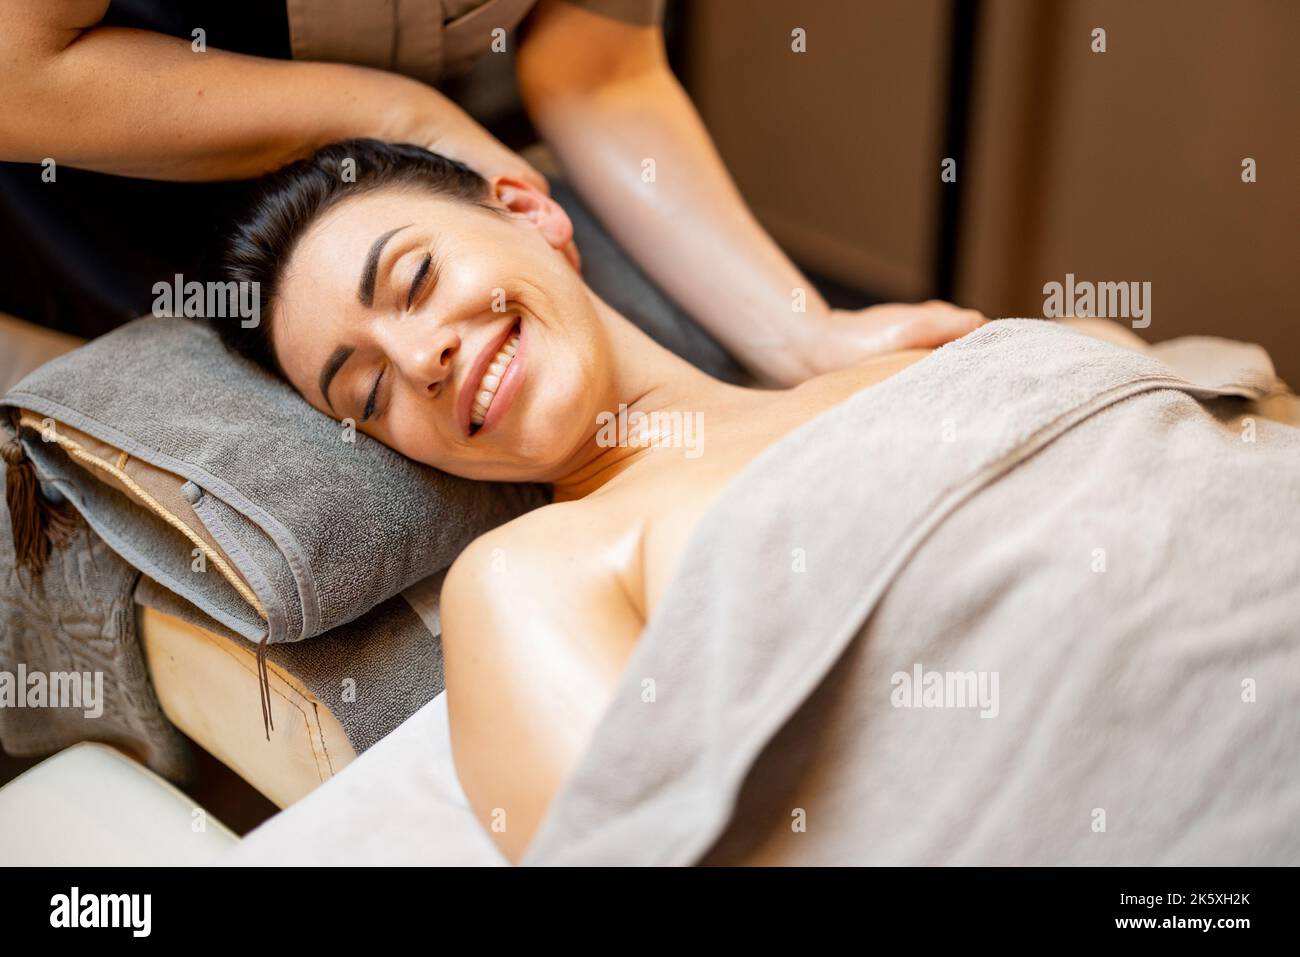 Woman receiving relaxation neck massage Stock Photo